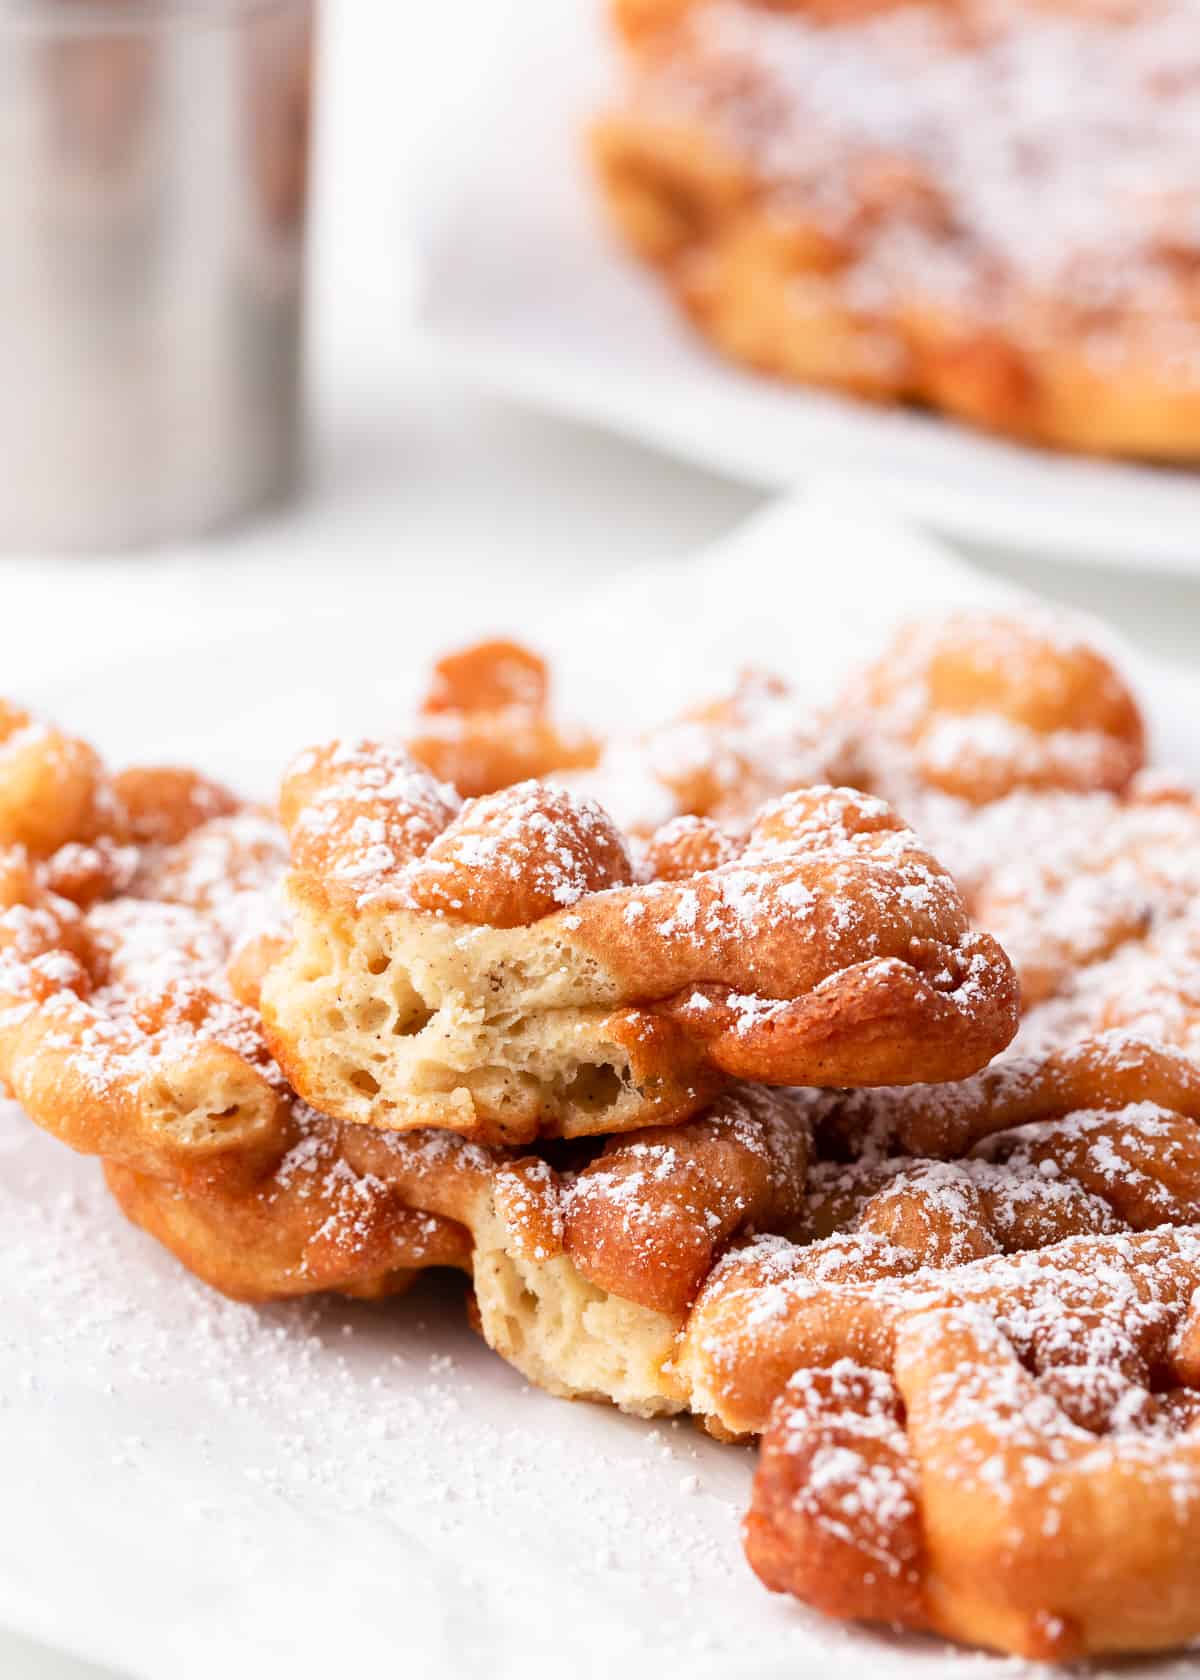 Funnel cake on a plate.